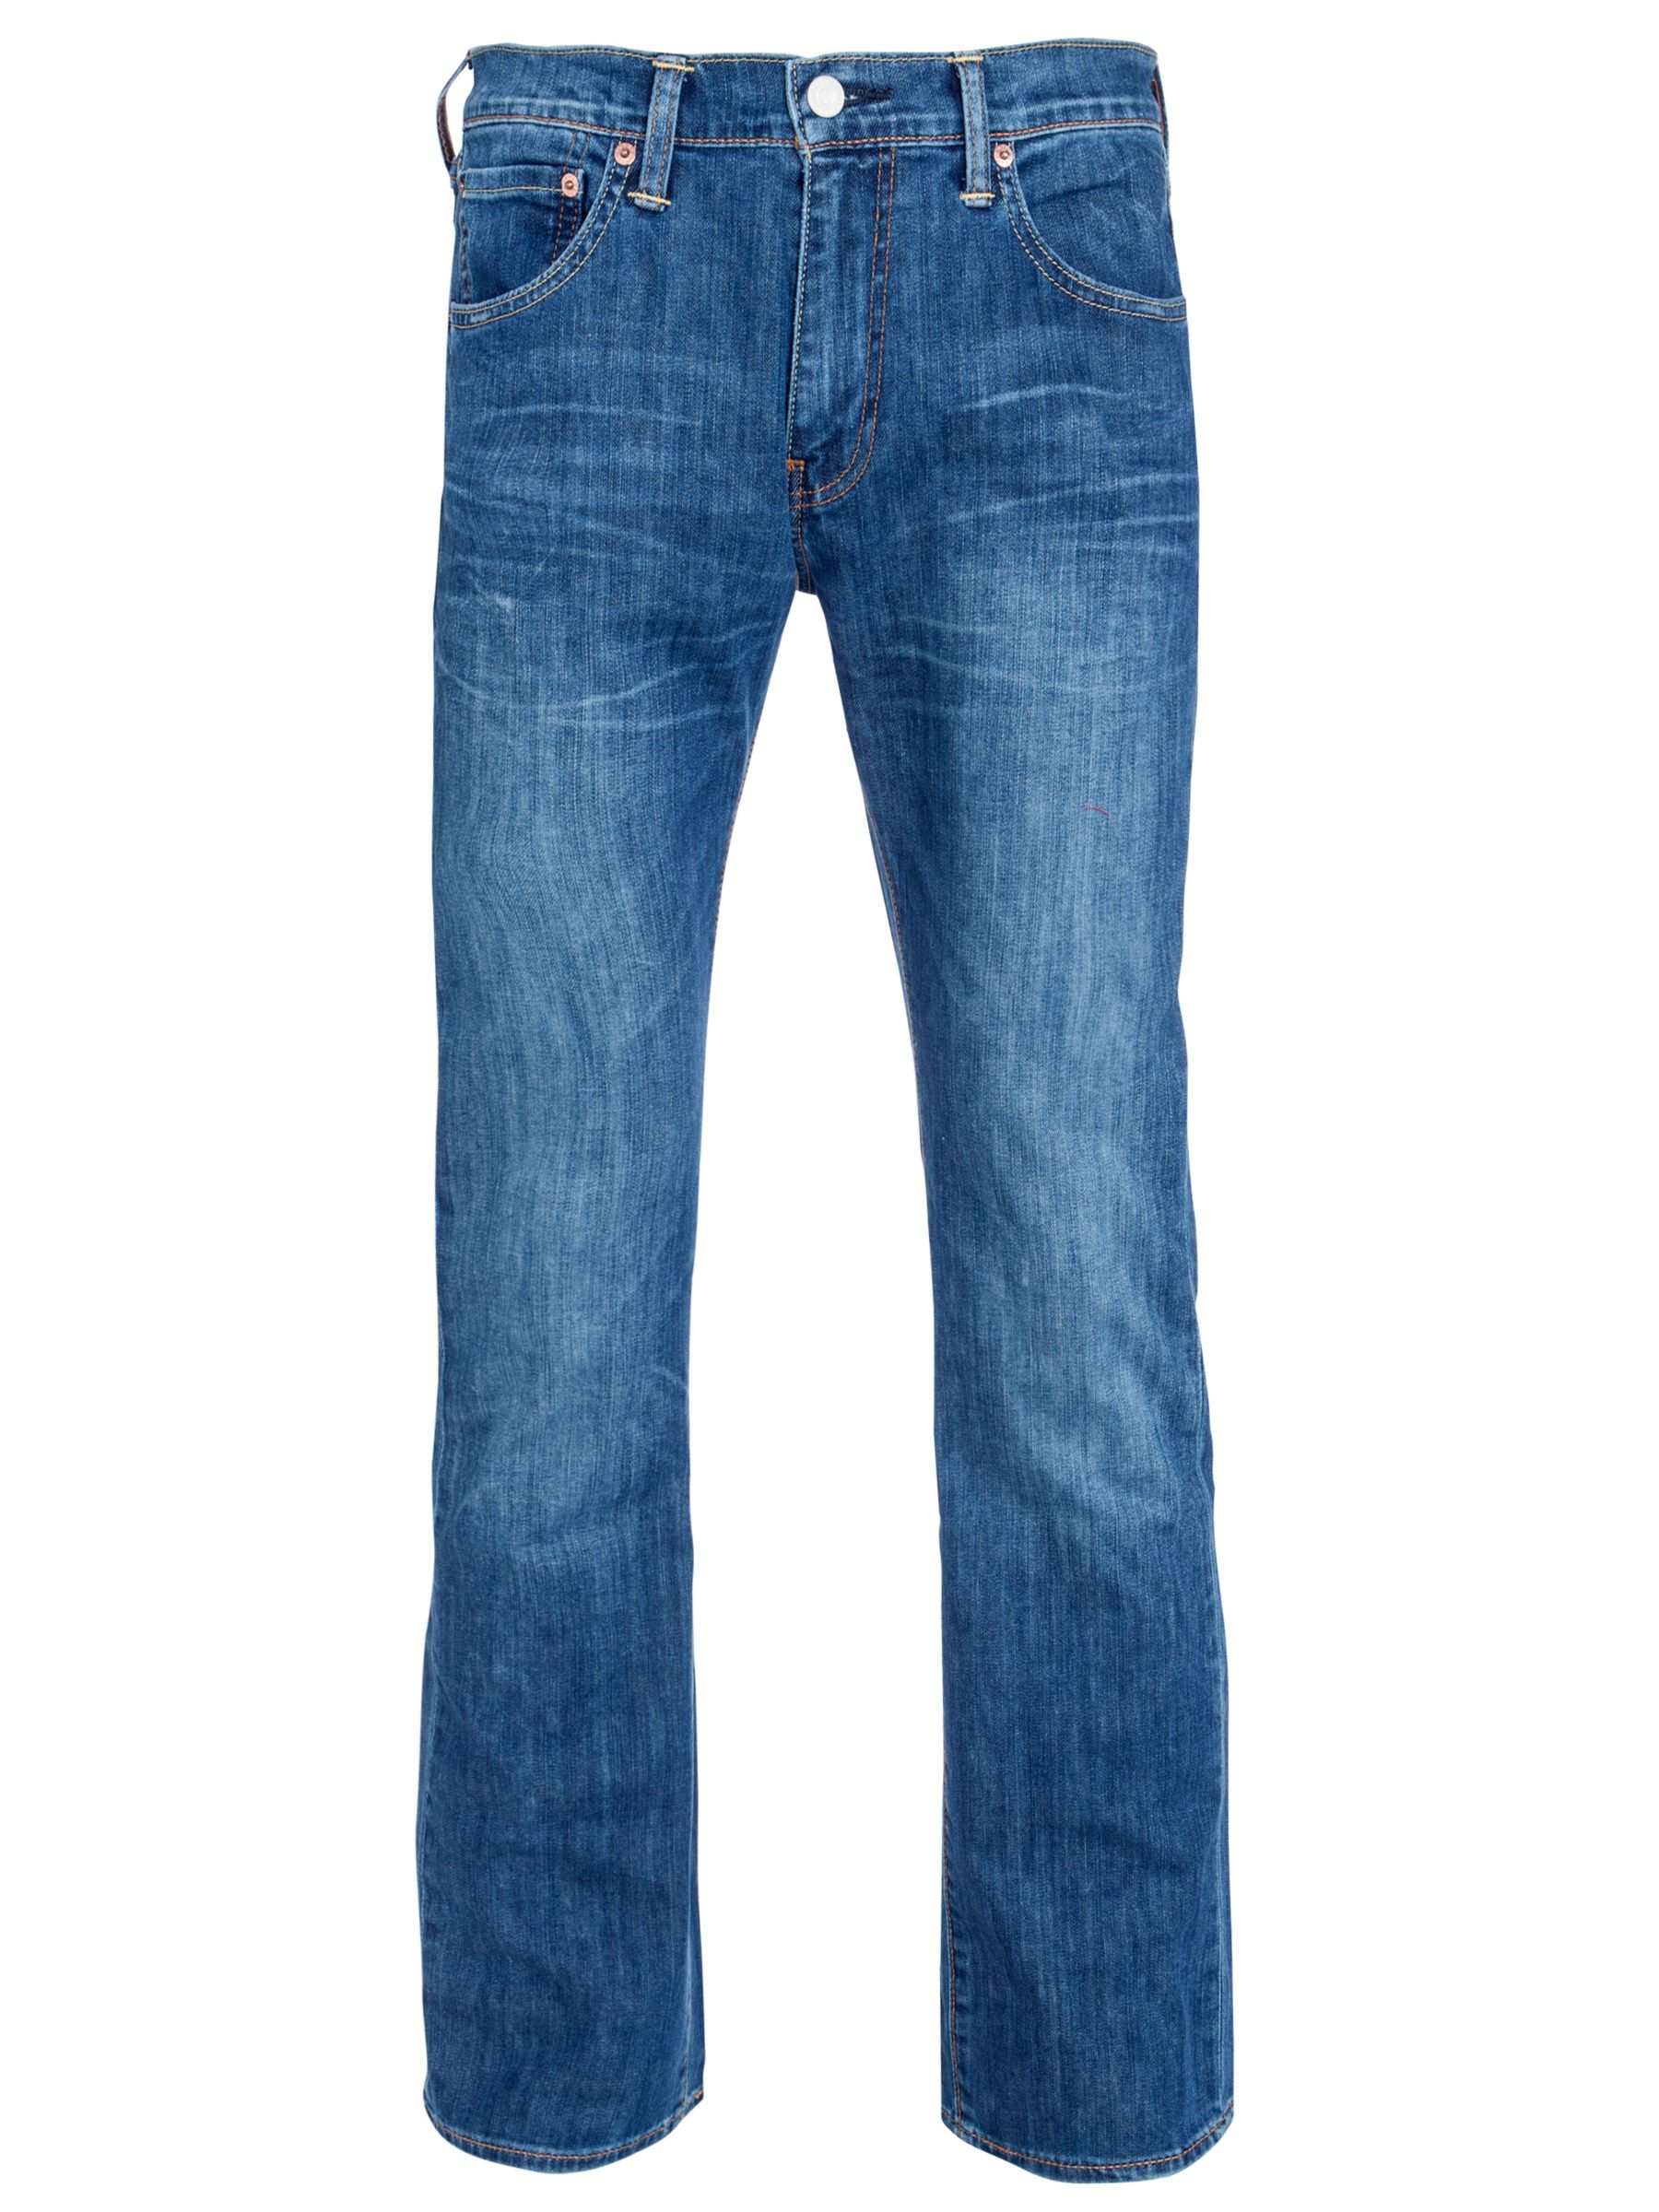 levis 527 mostly mid blue